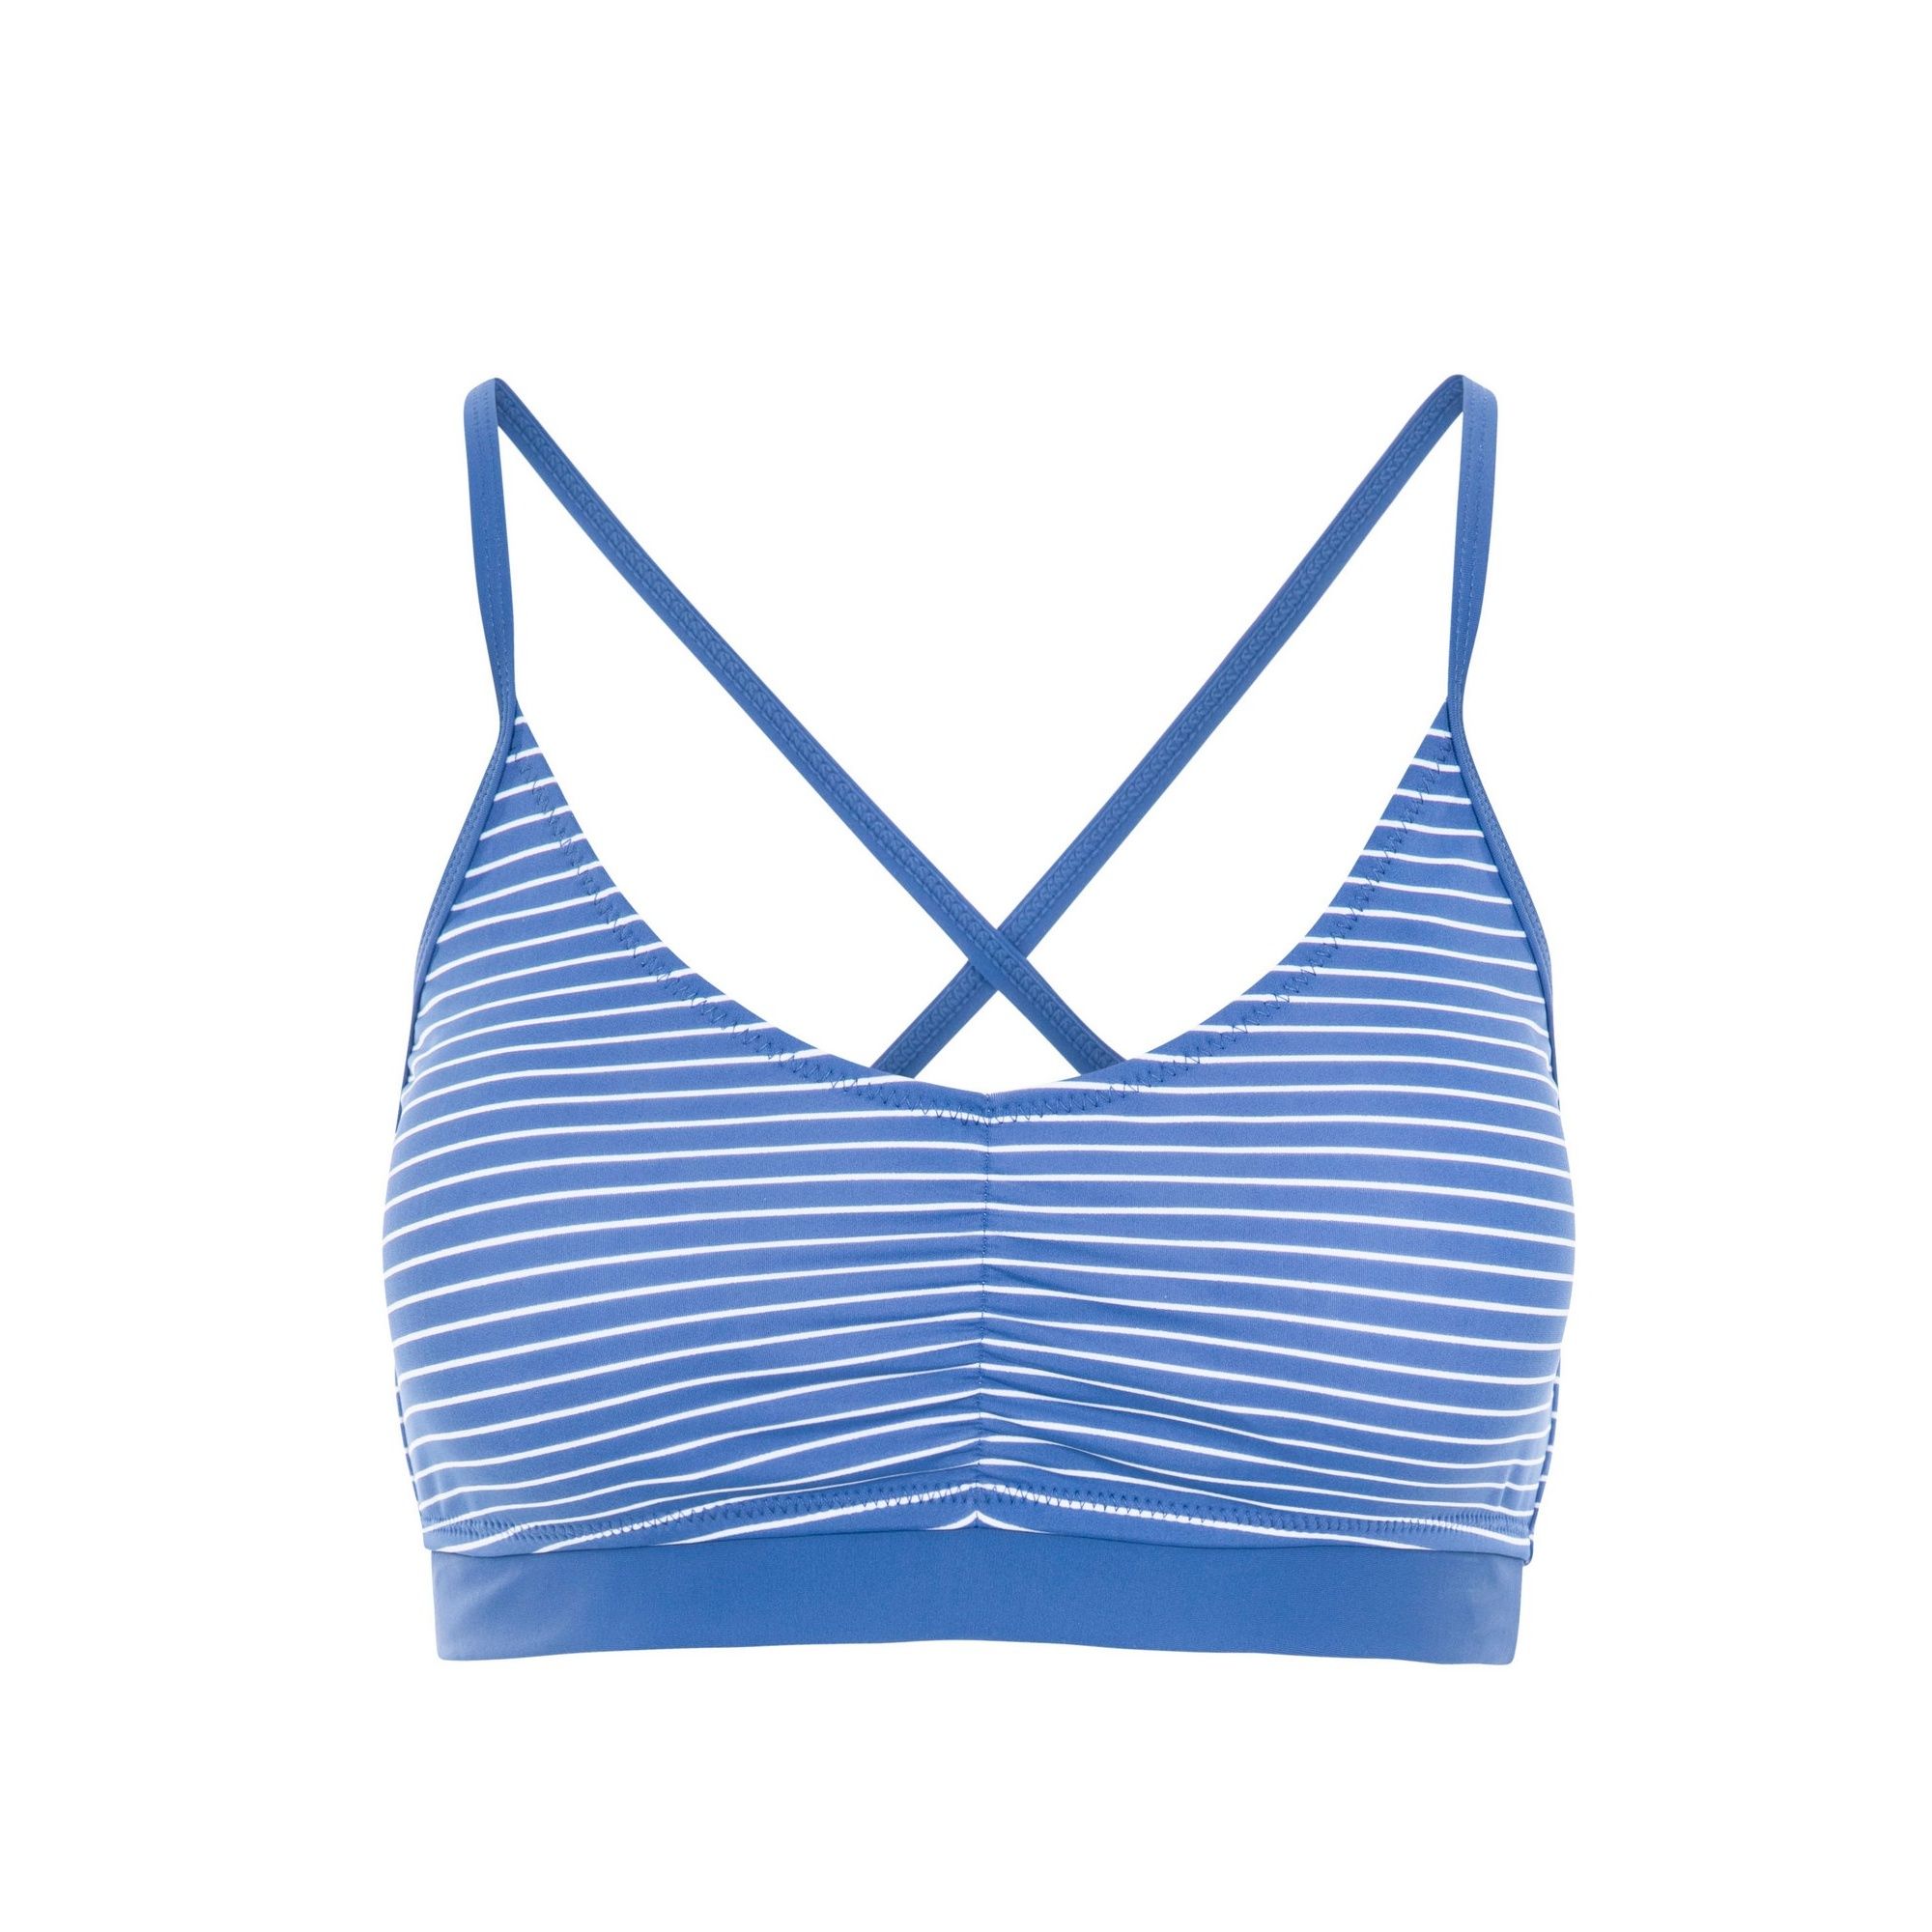 80% Polyamide, 20% Elastane. Adjustable cross over straps. Contrast trims. Removable bust pads. Trespass Womens Chest Sizing (approx): XS/8 - 32in/81cm, S/10 - 34in/86cm, M/12 - 36in/91.4cm, L/14 - 38in/96.5cm, XL/16 - 40in/101.5cm, XXL/18 - 42in/106.5cm.